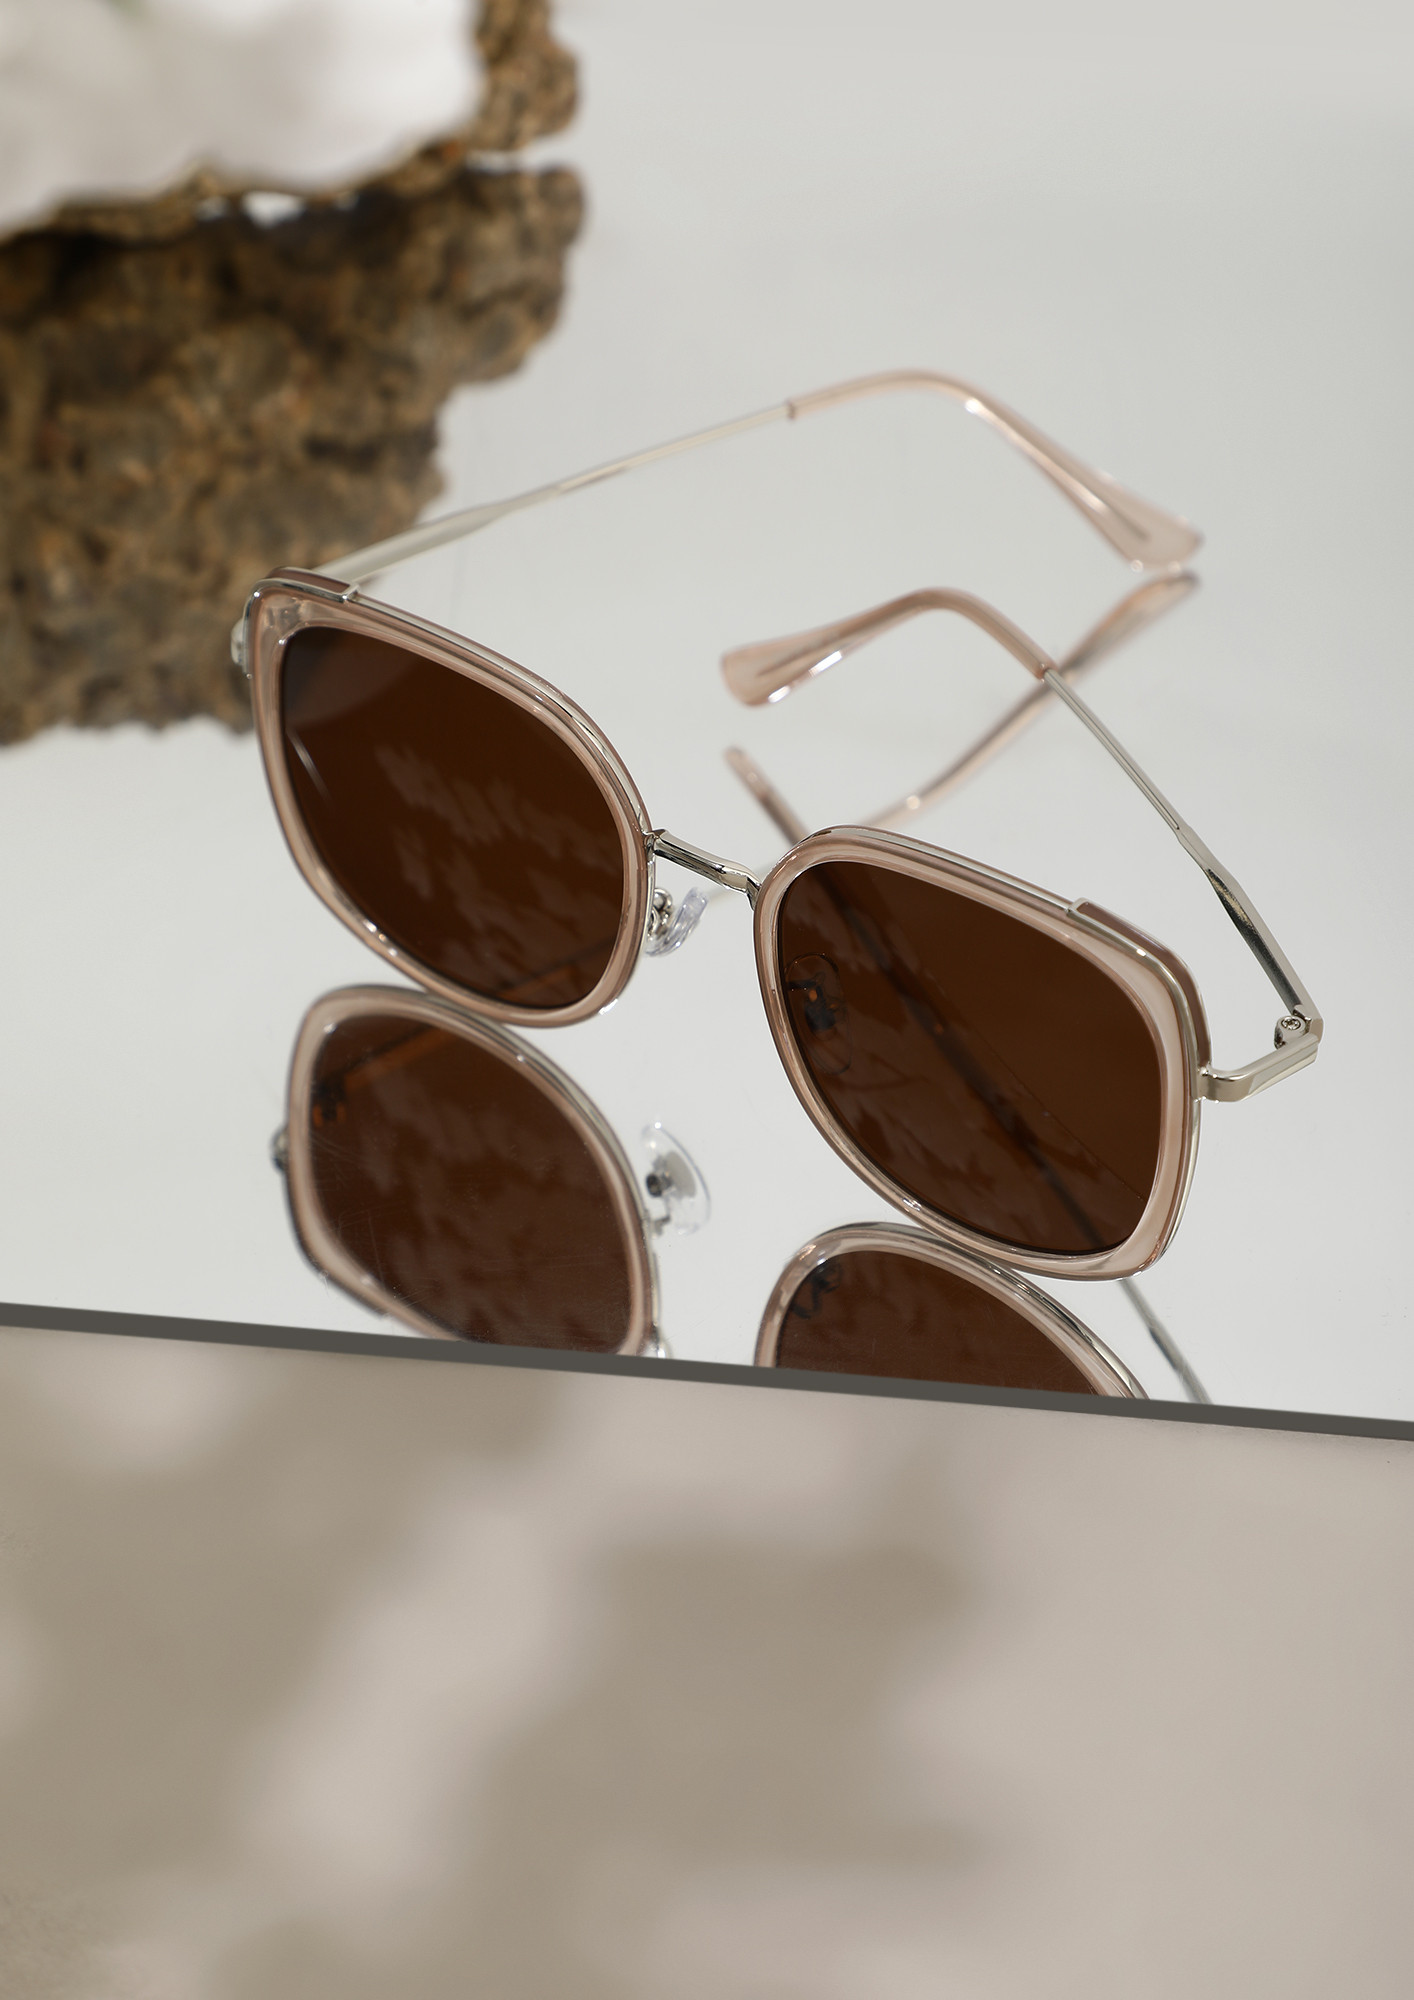 WHO SAYS SILVER BROWN LARGE SUNGLASSES